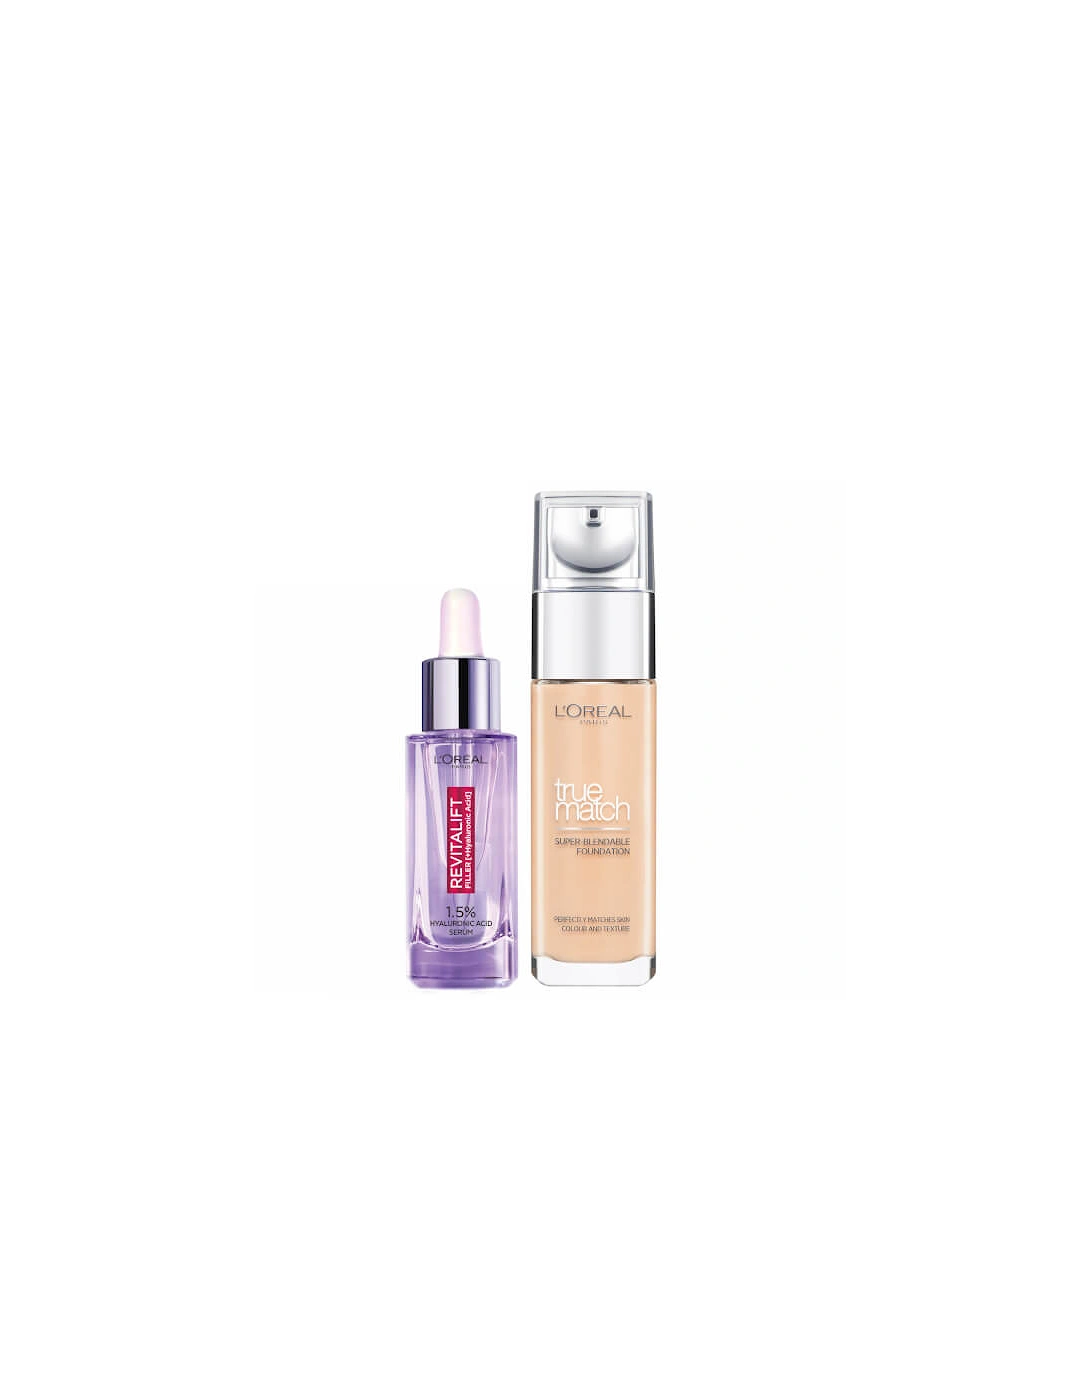 L’Oreal Paris Hyaluronic Acid Filler Serum and True Match Hyaluronic Acid Foundation Duo - 4W Golden Natural, 2 of 1